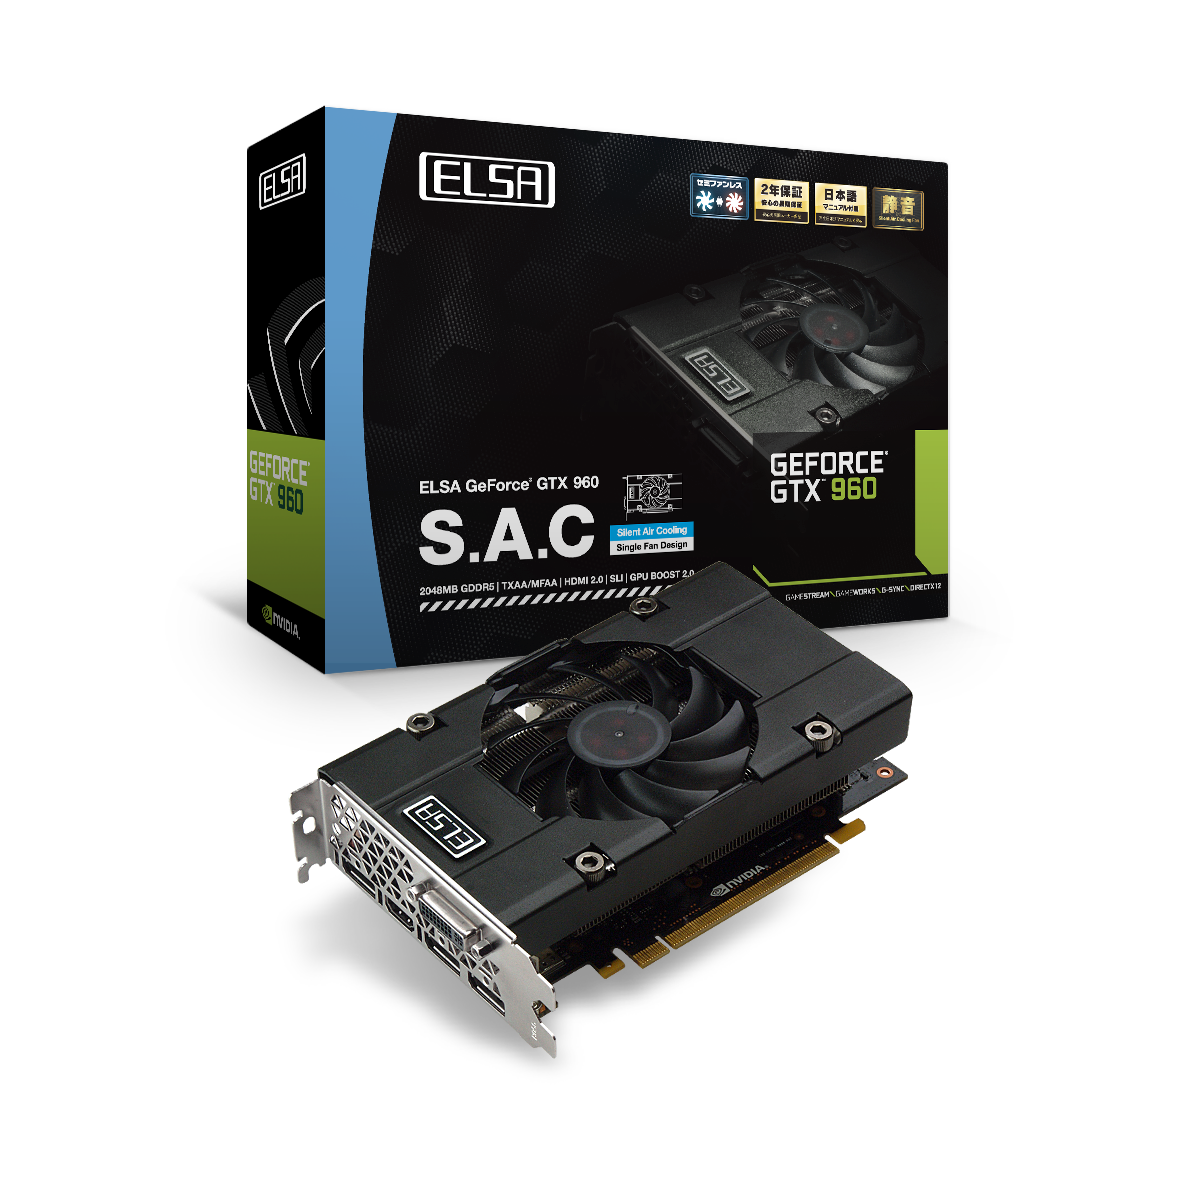 Media asset in full size related to 3dfxzone.it news item entitled as follows: ELSA introduce la card non reference GeForce GTX 960 2GB S.A.C. | Image Name: news22202_ELSA-GeForce-GTX-960-2GB-SAC_2.png